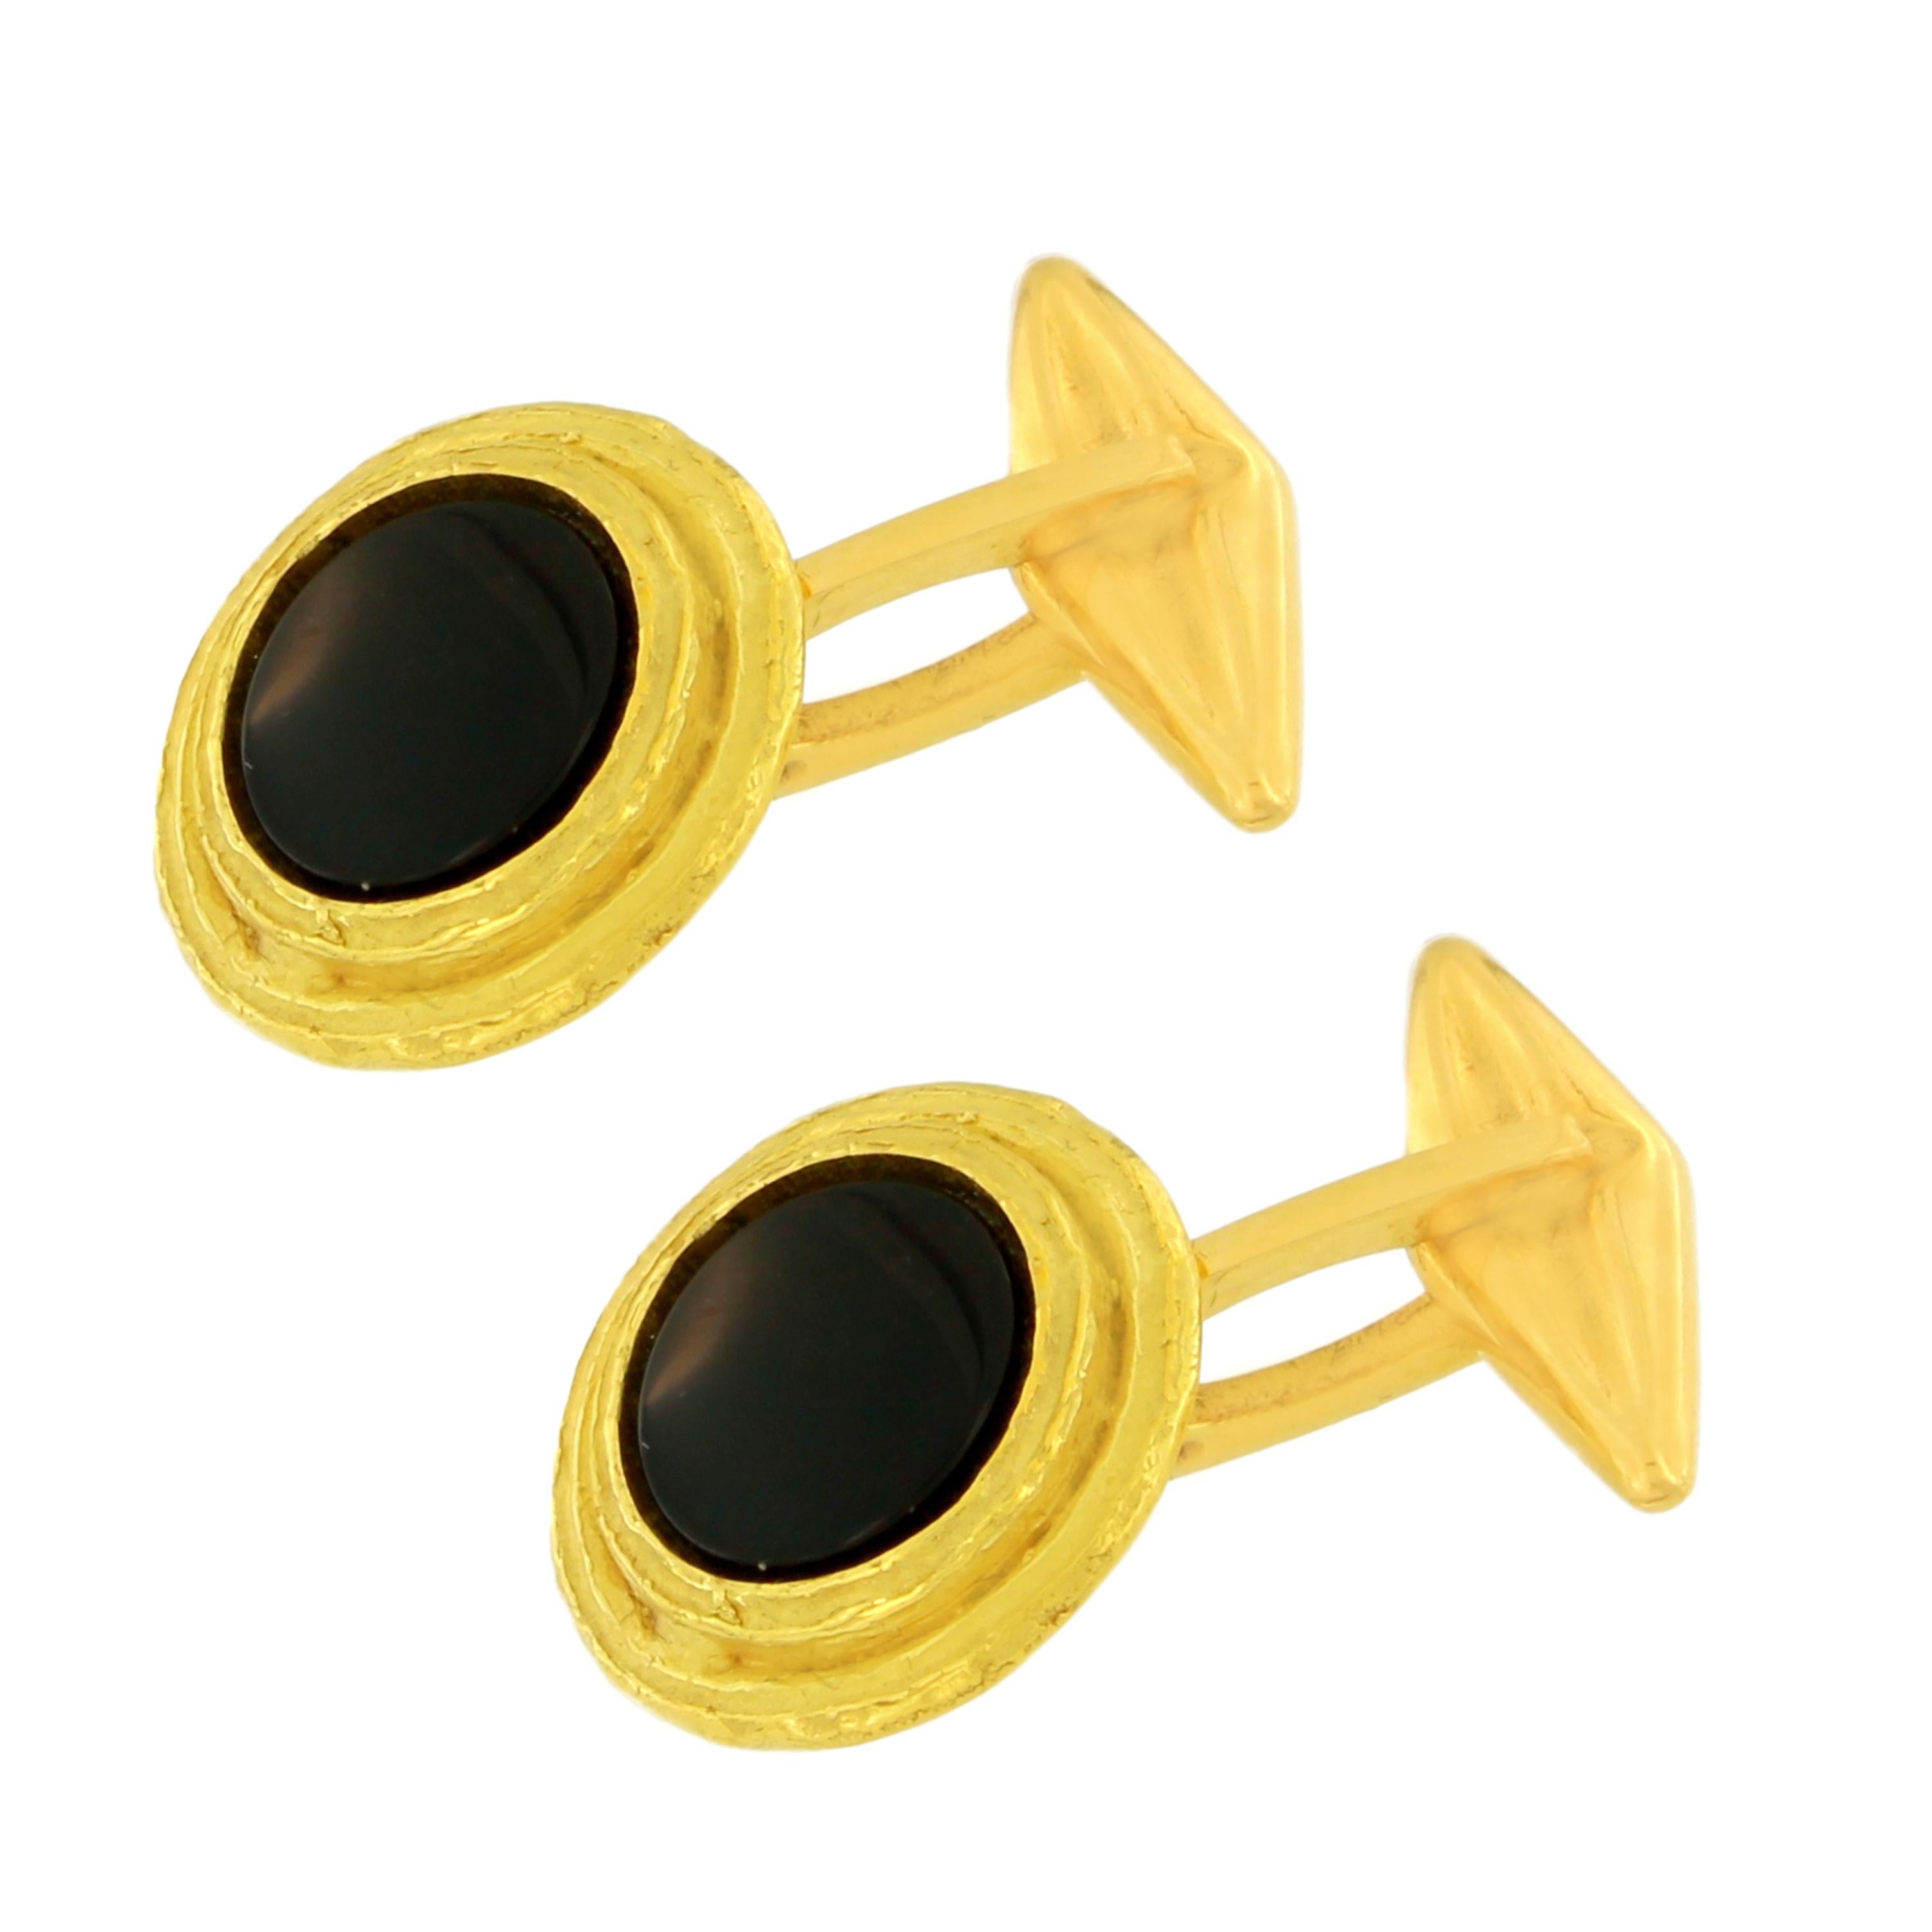 Black Onyx Gemstone Satin Yellow Gold Round Cufflinks hand-crafted with lost-wax casting technique.

Lost-wax casting, one of the oldest techniques for creating jewellery, forms the basis of Sacchi's jewellery production. Modelling wax in the round